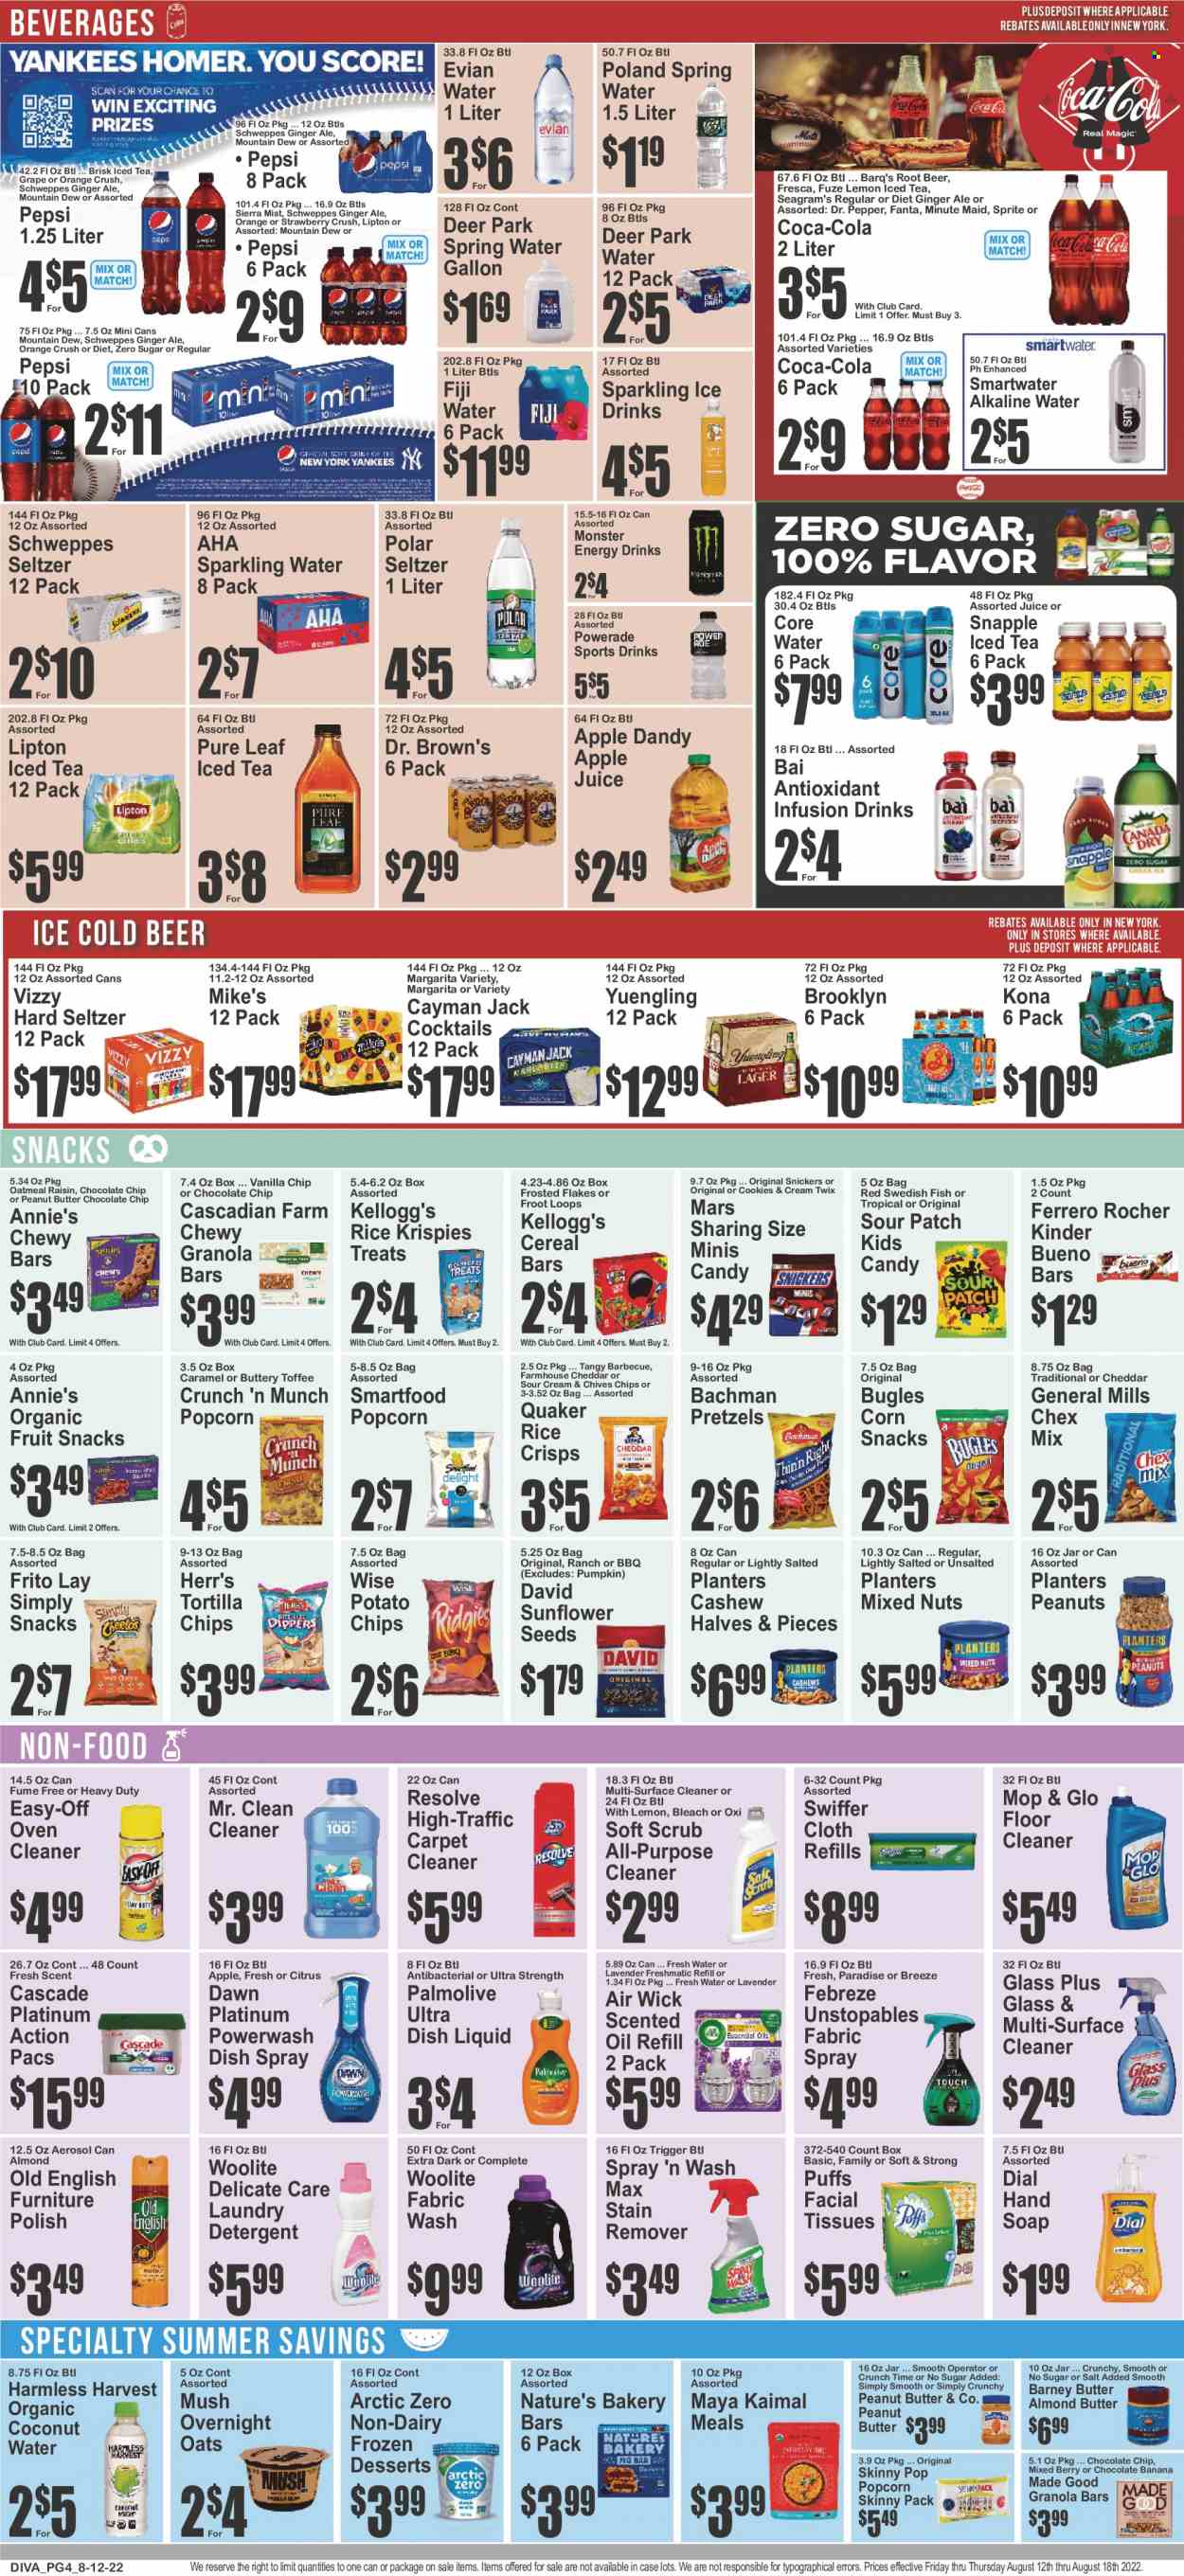 thumbnail - Brooklyn Fare Flyer - 08/12/2022 - 08/18/2022 - Sales products - pretzels, puffs, pumpkin, chives, oranges, Quaker, Annie's, cheese, almond butter, cookies, Ferrero Rocher, Snickers, Twix, Mars, toffee, cereal bar, Kellogg's, Kinder Bueno, fruit snack, sour patch, tortilla chips, potato chips, Smartfood, popcorn, rice crisps, Skinny Pop, Chex Mix, oatmeal, cereals, granola bar, Rice Krispies, Frosted Flakes, oil, peanuts, sunflower seeds, mixed nuts, Planters, apple juice, Coca-Cola, ginger ale, Mountain Dew, Schweppes, Sprite, Powerade, Pepsi, juice, Fanta, energy drink, Monster, Lipton, ice tea, Dr. Pepper, coconut water, Monster Energy, Snapple, Dr. Brown's, Sierra Mist, Bai, fruit punch, spring water, sparkling water, Smartwater, alkaline water, Evian, Pure Leaf, Hard Seltzer, beer, tissues, detergent, Febreze, surface cleaner, cleaner, bleach, floor cleaner, stain remover, Woolite, Swiffer, Cascade, Unstopables, laundry detergent, dishwashing liquid, hand soap, Palmolive, Dial, soap, facial tissues, polish, Air Wick, scented oil, Yuengling. Page 4.